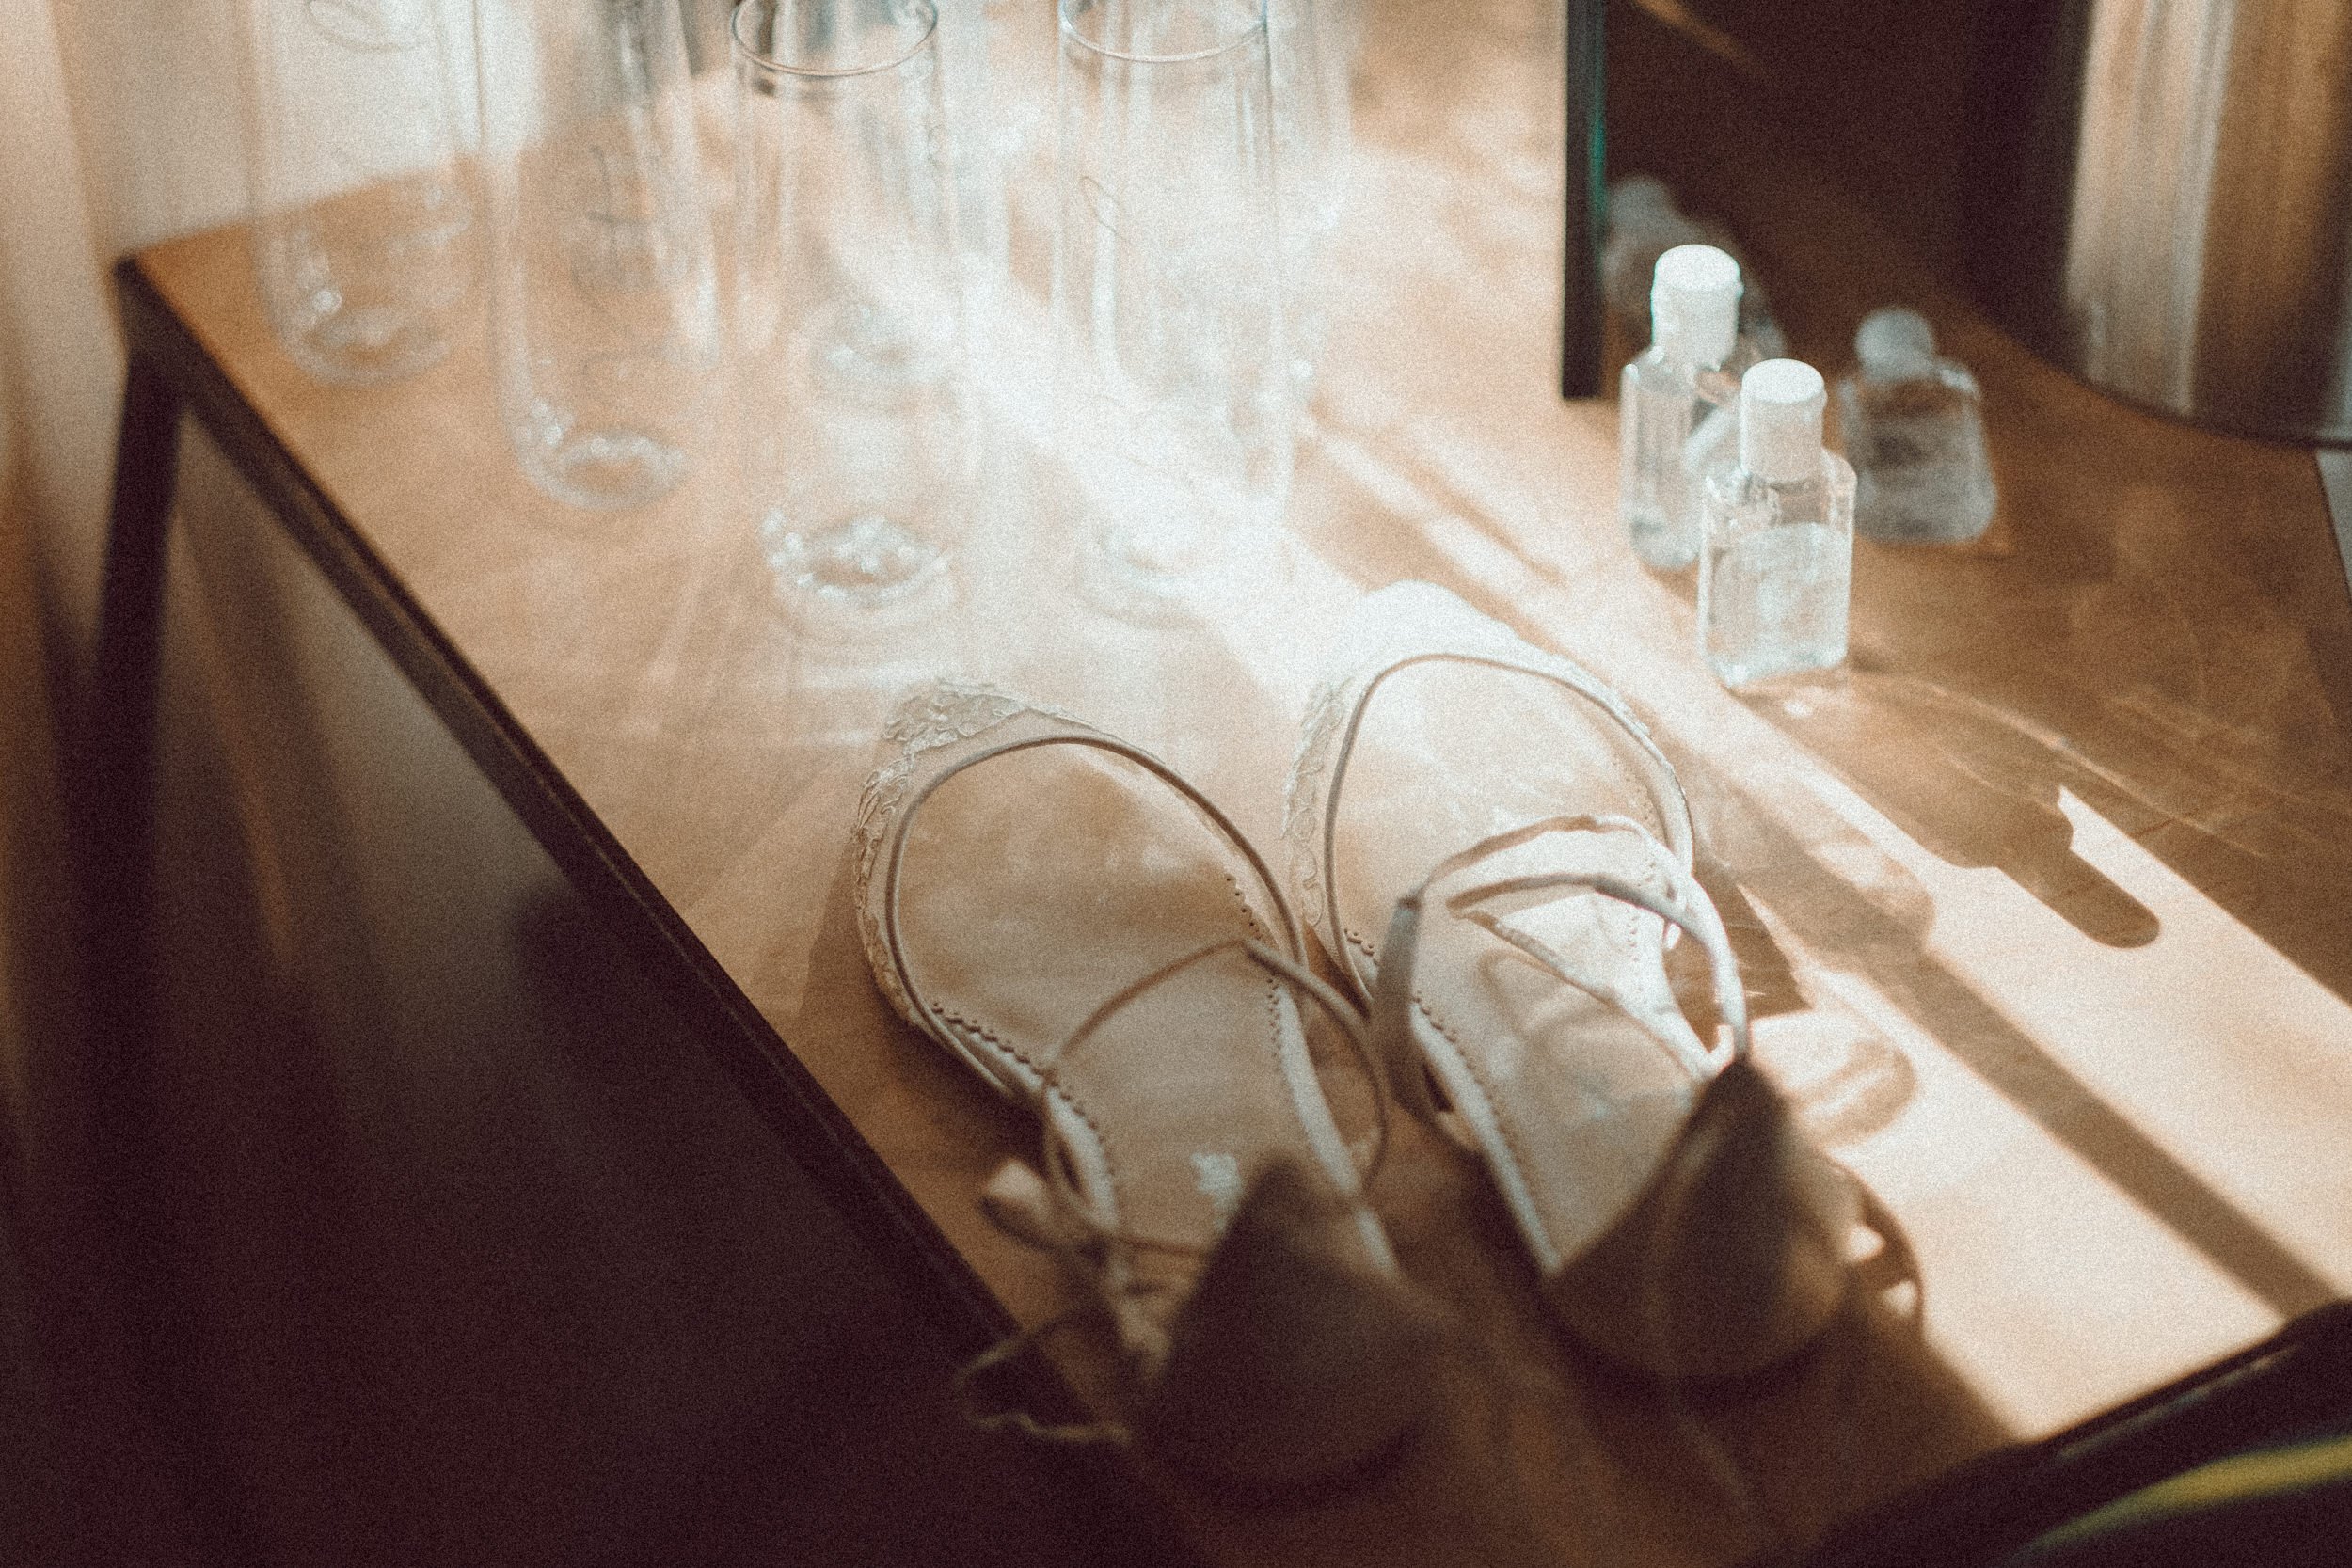 Bridal shoes in sunlight wedding photography